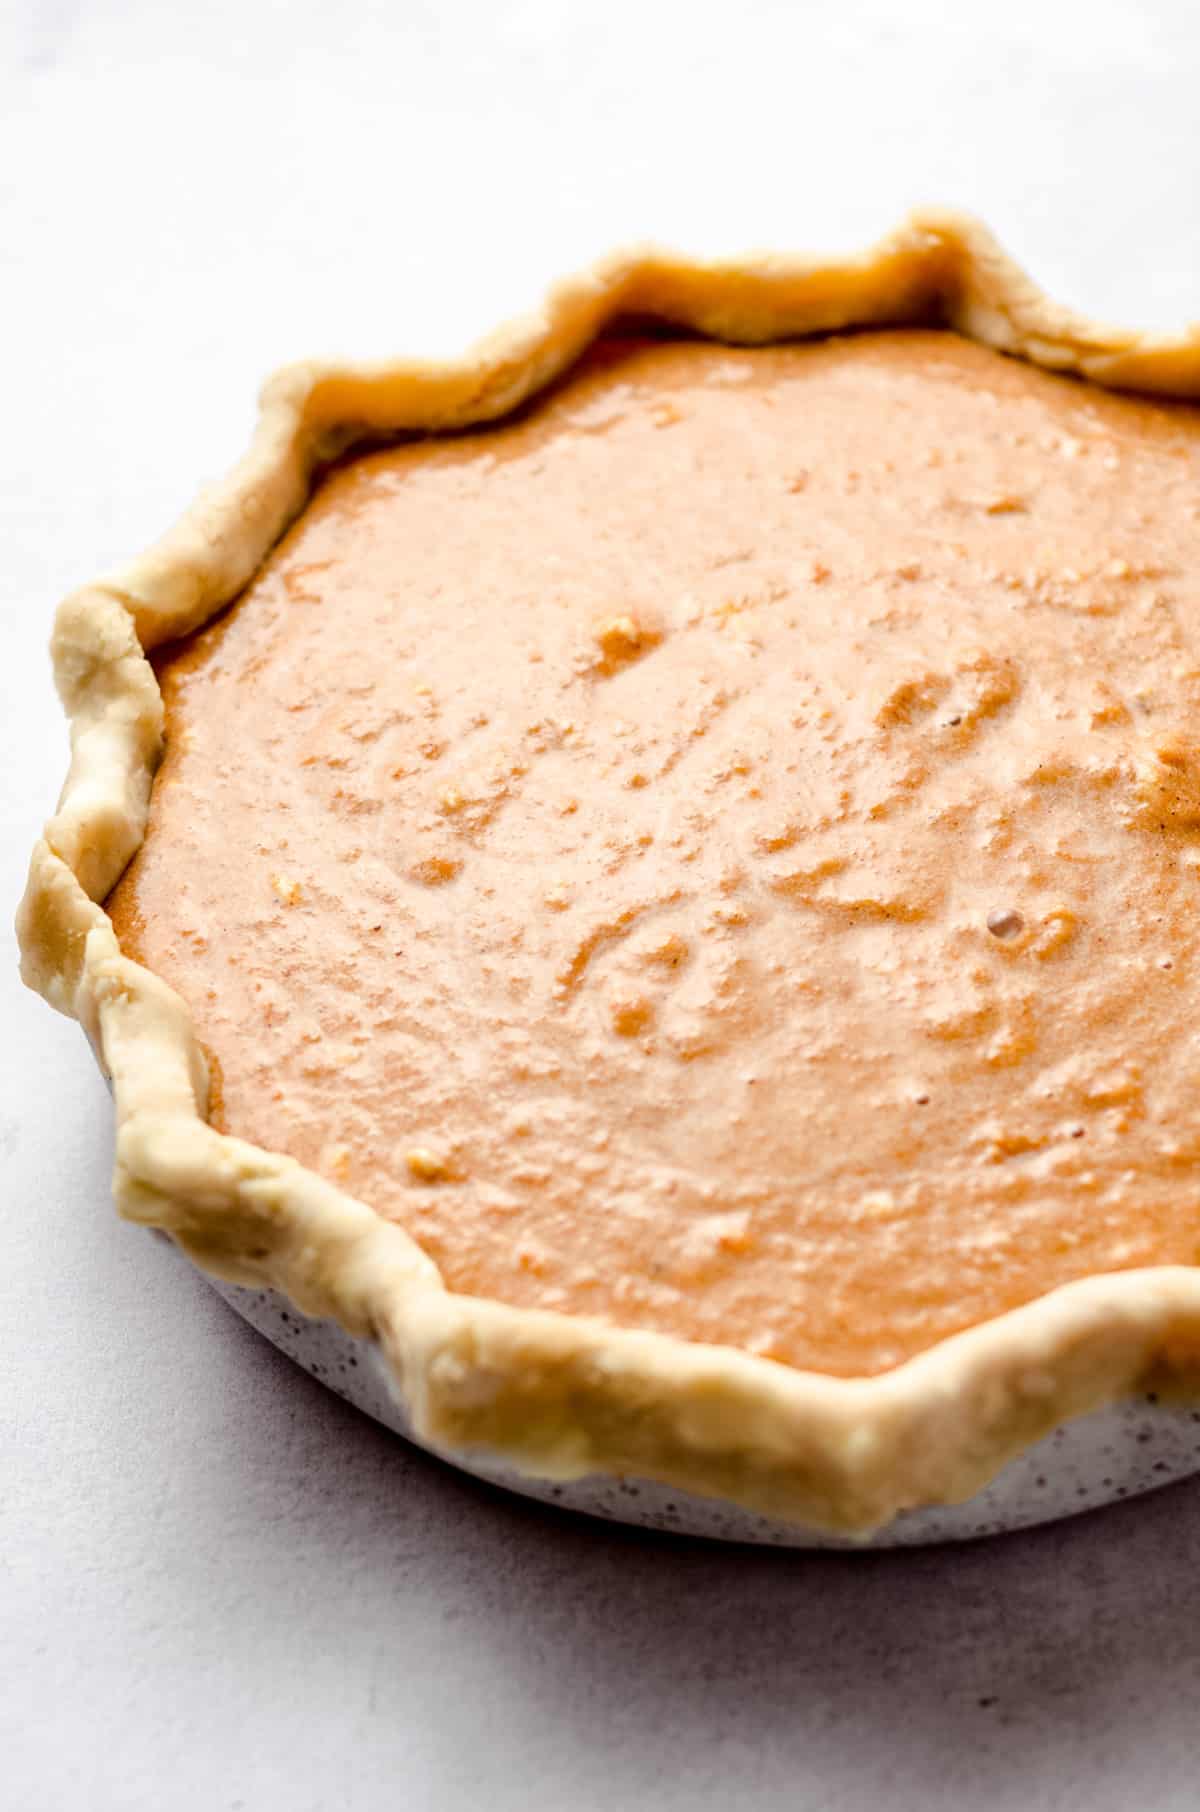 A homemade pie crust filled with a sweet potato filling.